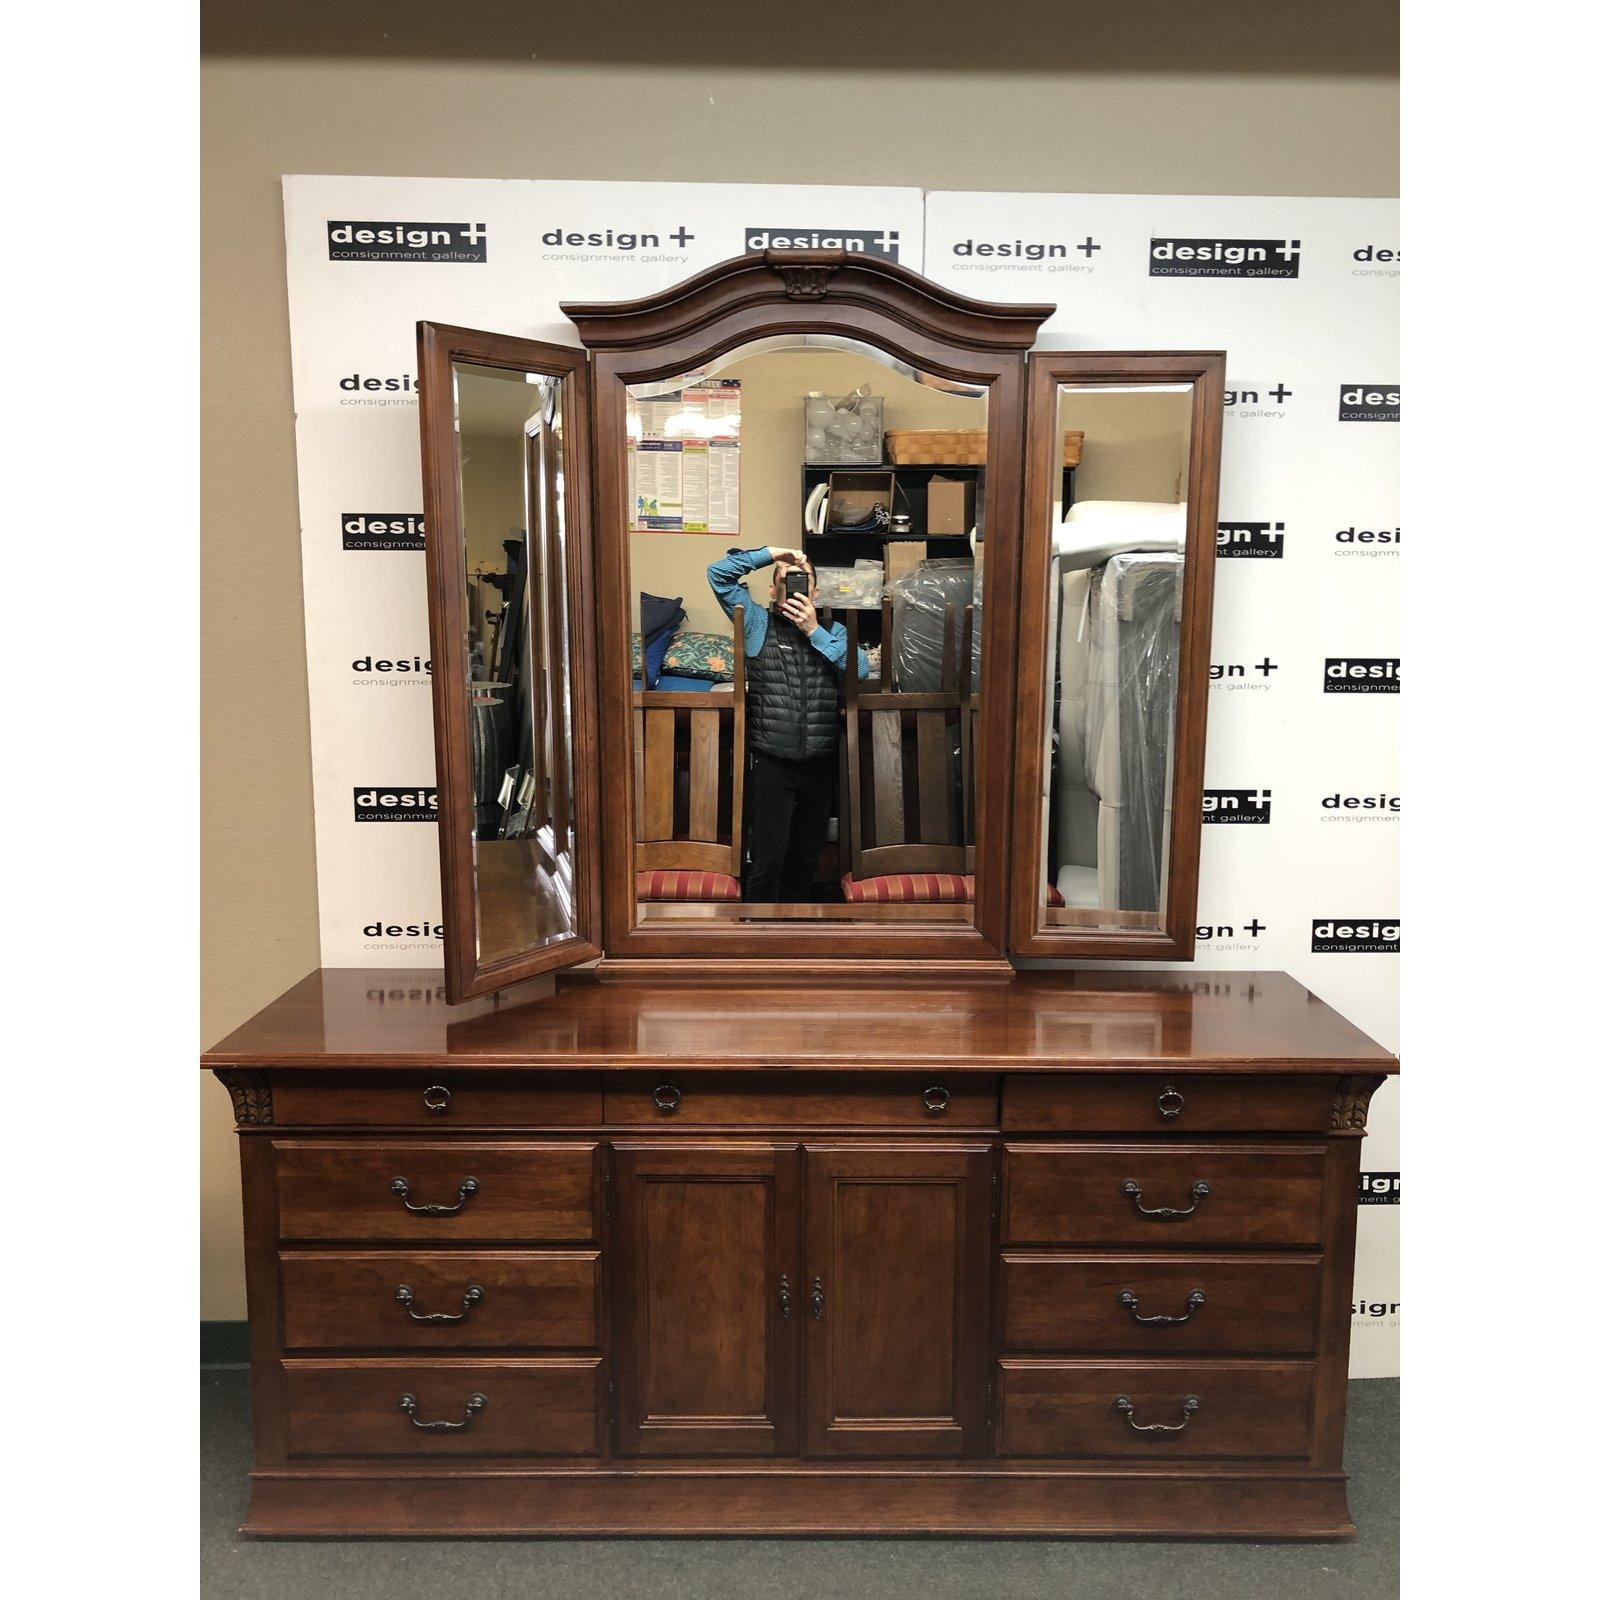 A traditional double dresser by Hickory white. Crafted of maple solids and cherry veneers, the finish has light distressing and lovely carved details. Nine drawers and adjustable shelf allows for ample storage. Fittings are antiqued bronze. Three